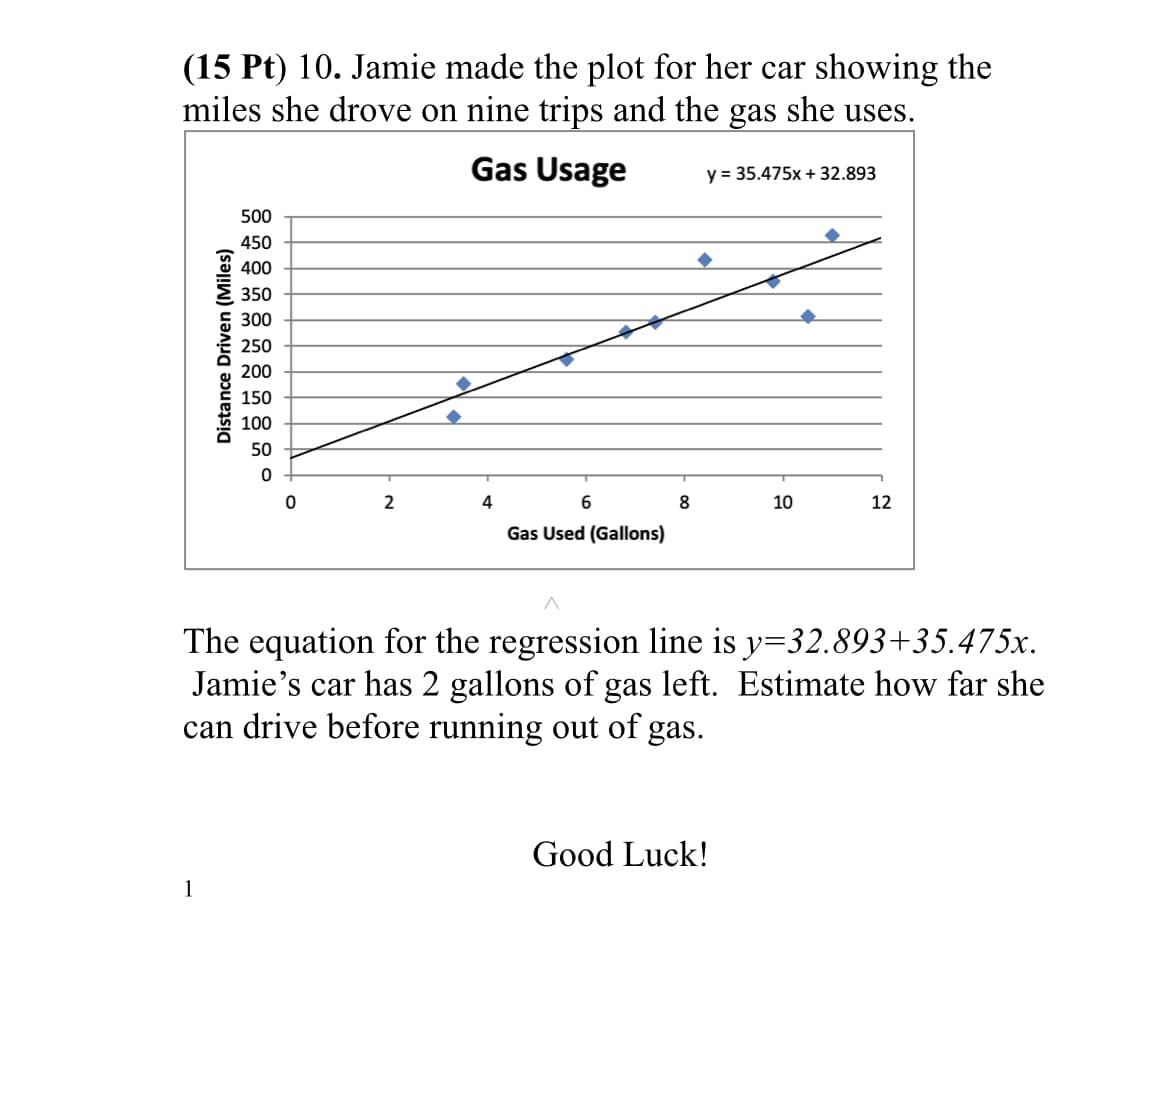 (15 Pt) 10. Jamie made the plot for her car showing the
miles she drove on nine trips and the gas she uses.
Gas Usage
Distance Driven (Miles)
1
500
450
400
350
300
250
200
150
100
50
0
0
2
4
6
Gas Used (Gallons)
8
y = 35.475x + 32.893
10
^
The equation for the regression line is y=32.893+35.475x.
Jamie's car has 2 gallons of gas left. Estimate how far she
can drive before running out of gas.
Good Luck!
12